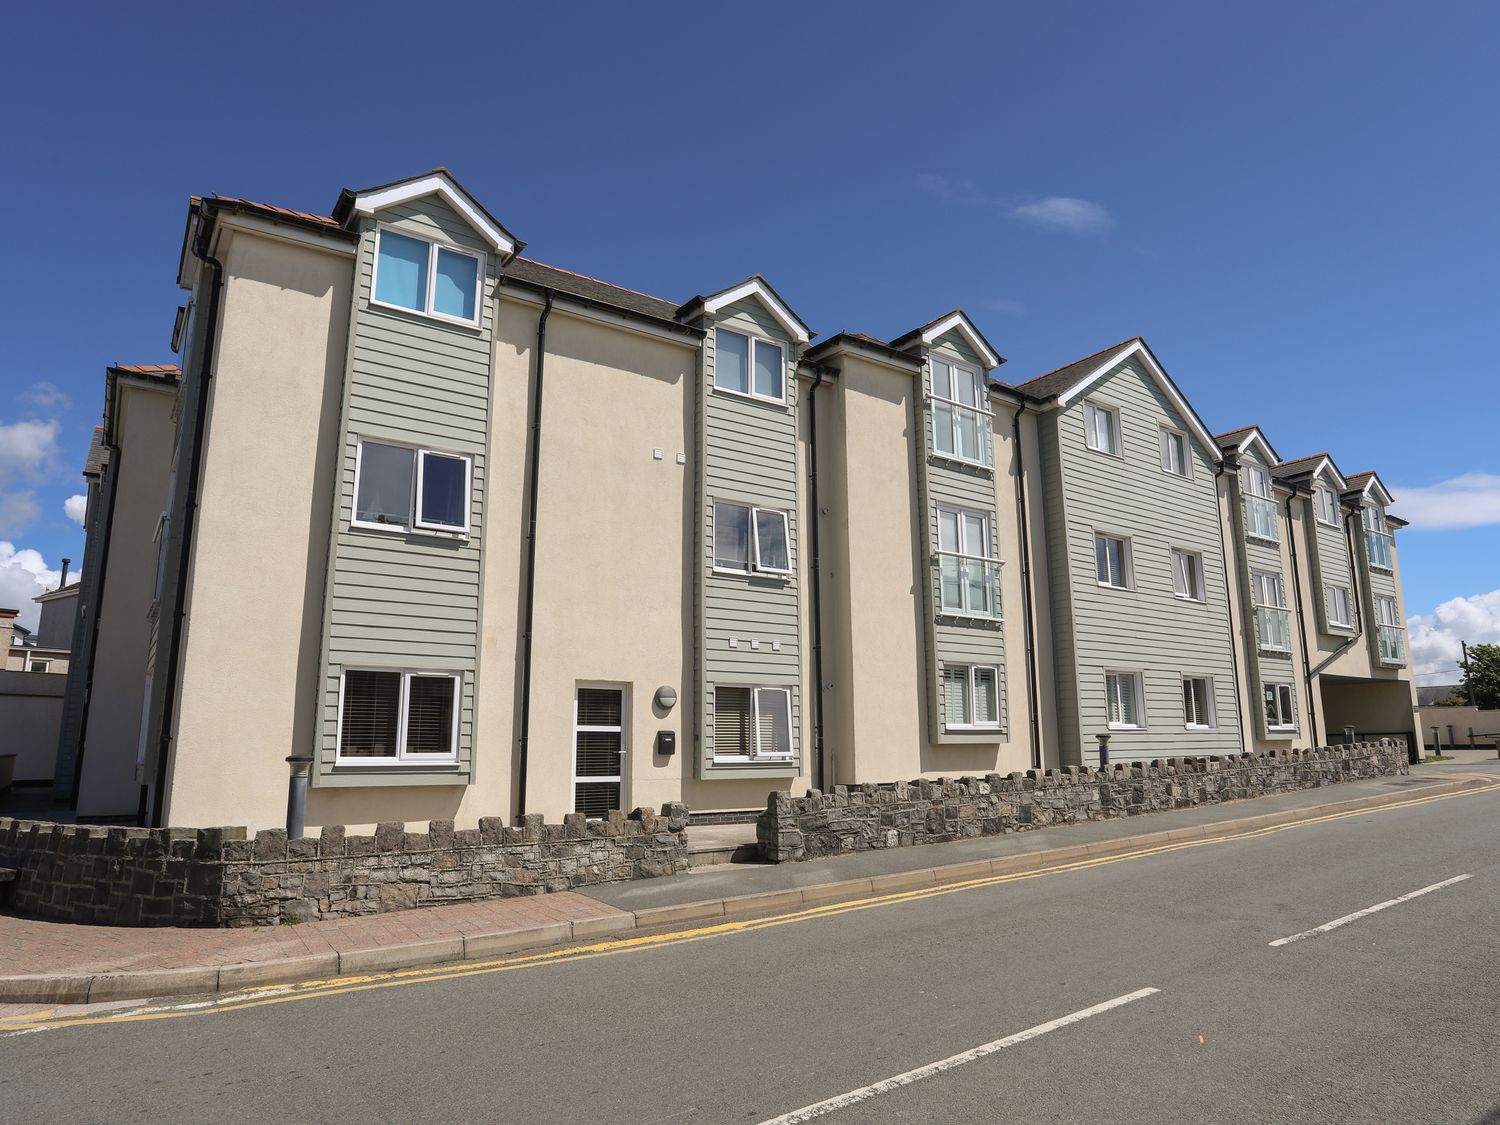 8 Pen Llanw Tides Reach - Anglesey - 1083868 - photo 1